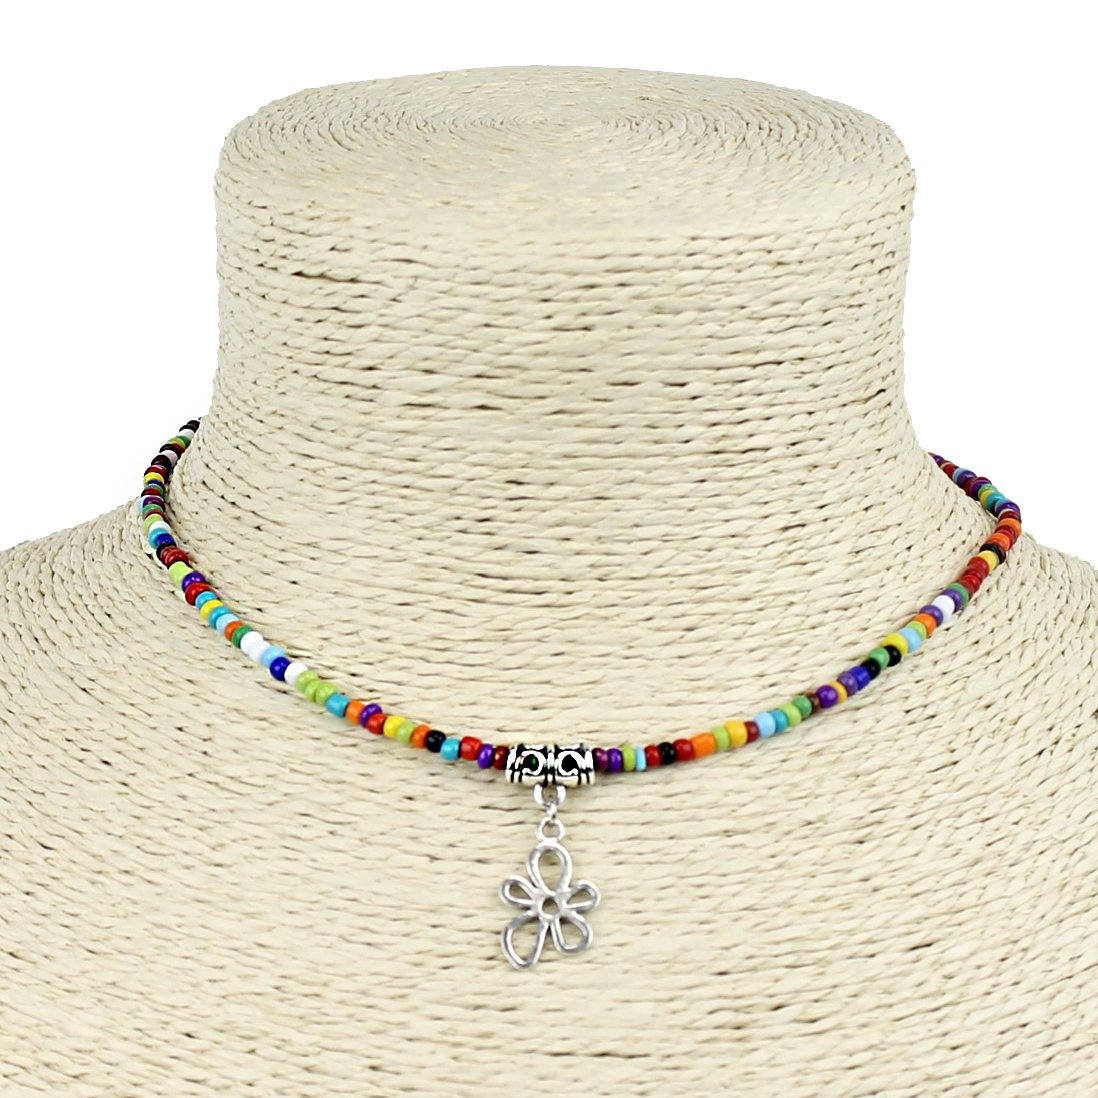 Seed Bead Choker Necklace Bohemian Style Multicolored with Dangle Daisy Charm